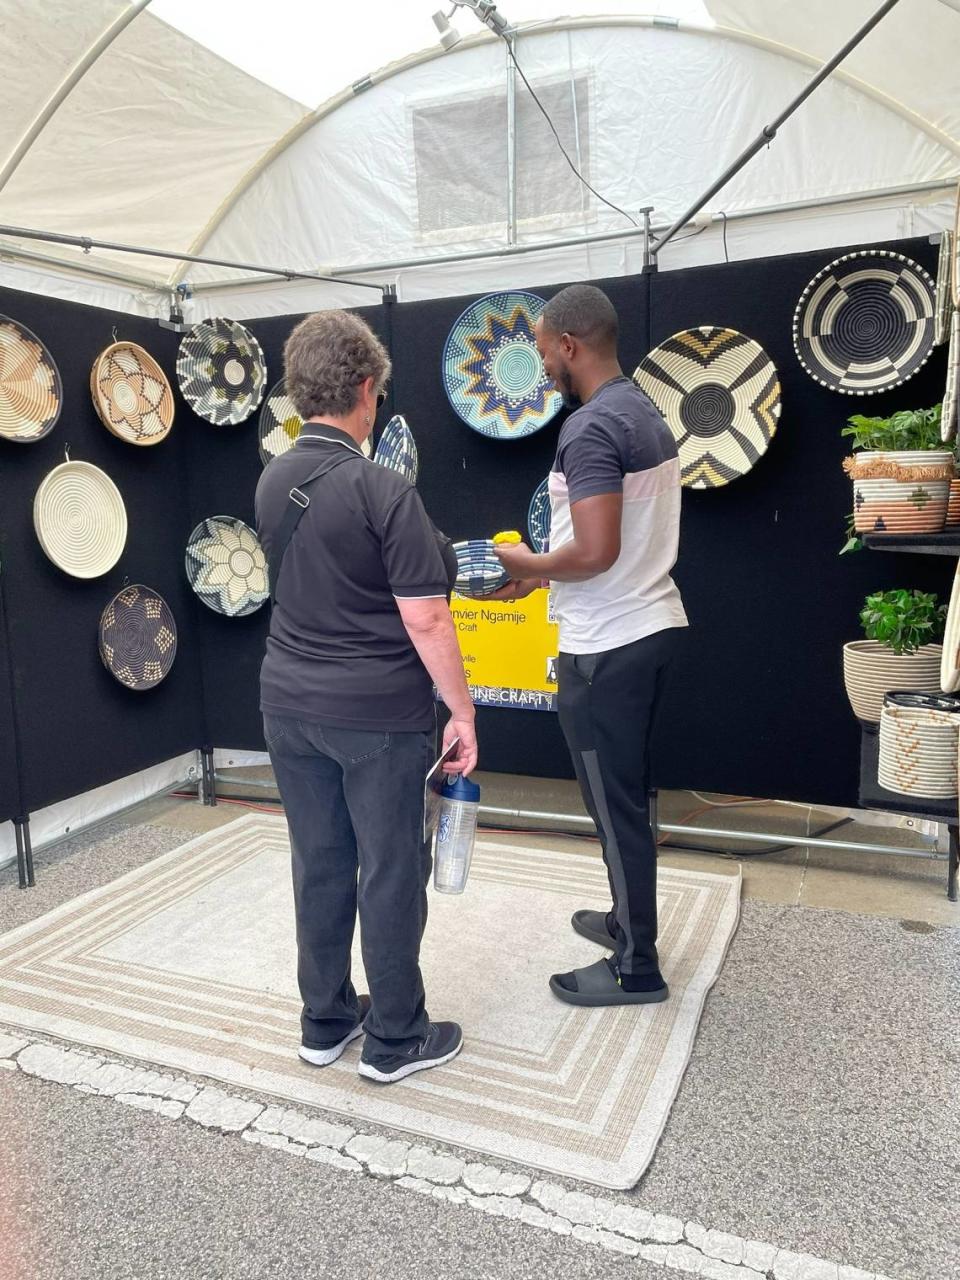 Janvier Ngamije, a fine-craft artist from Lewisville, Texas, discusses a piece of his work with one of the thousands who attended Belleville’s Art on the Square on Saturday, May 20, 2023. The show continues Sunday from 11 a.m. to 5 p.m.